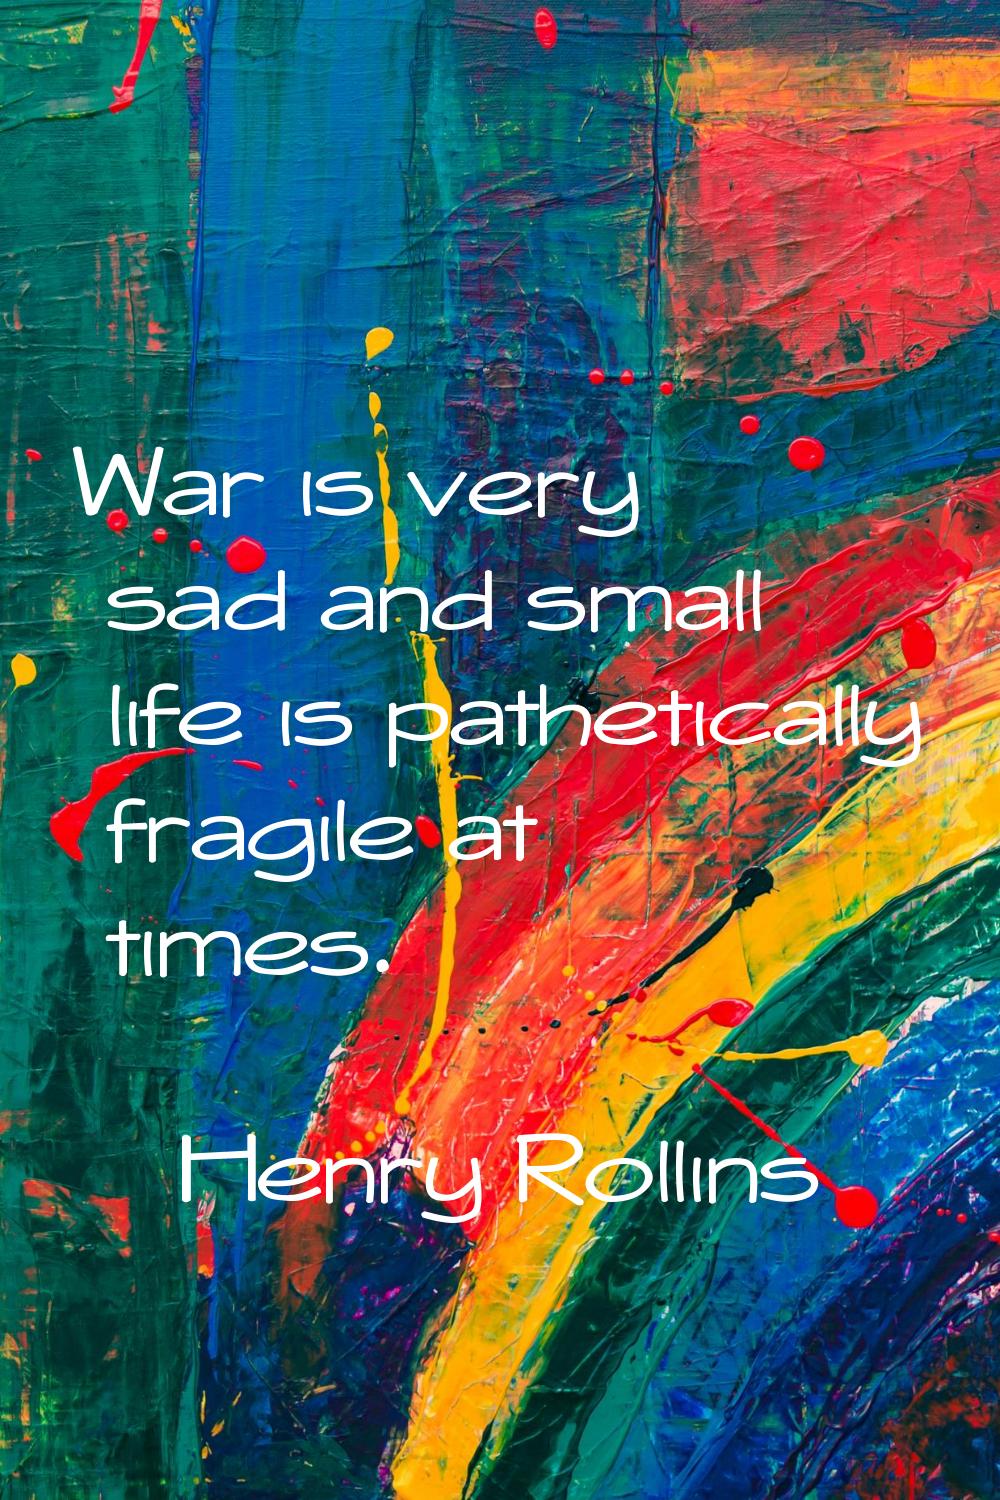 War is very sad and small life is pathetically fragile at times.